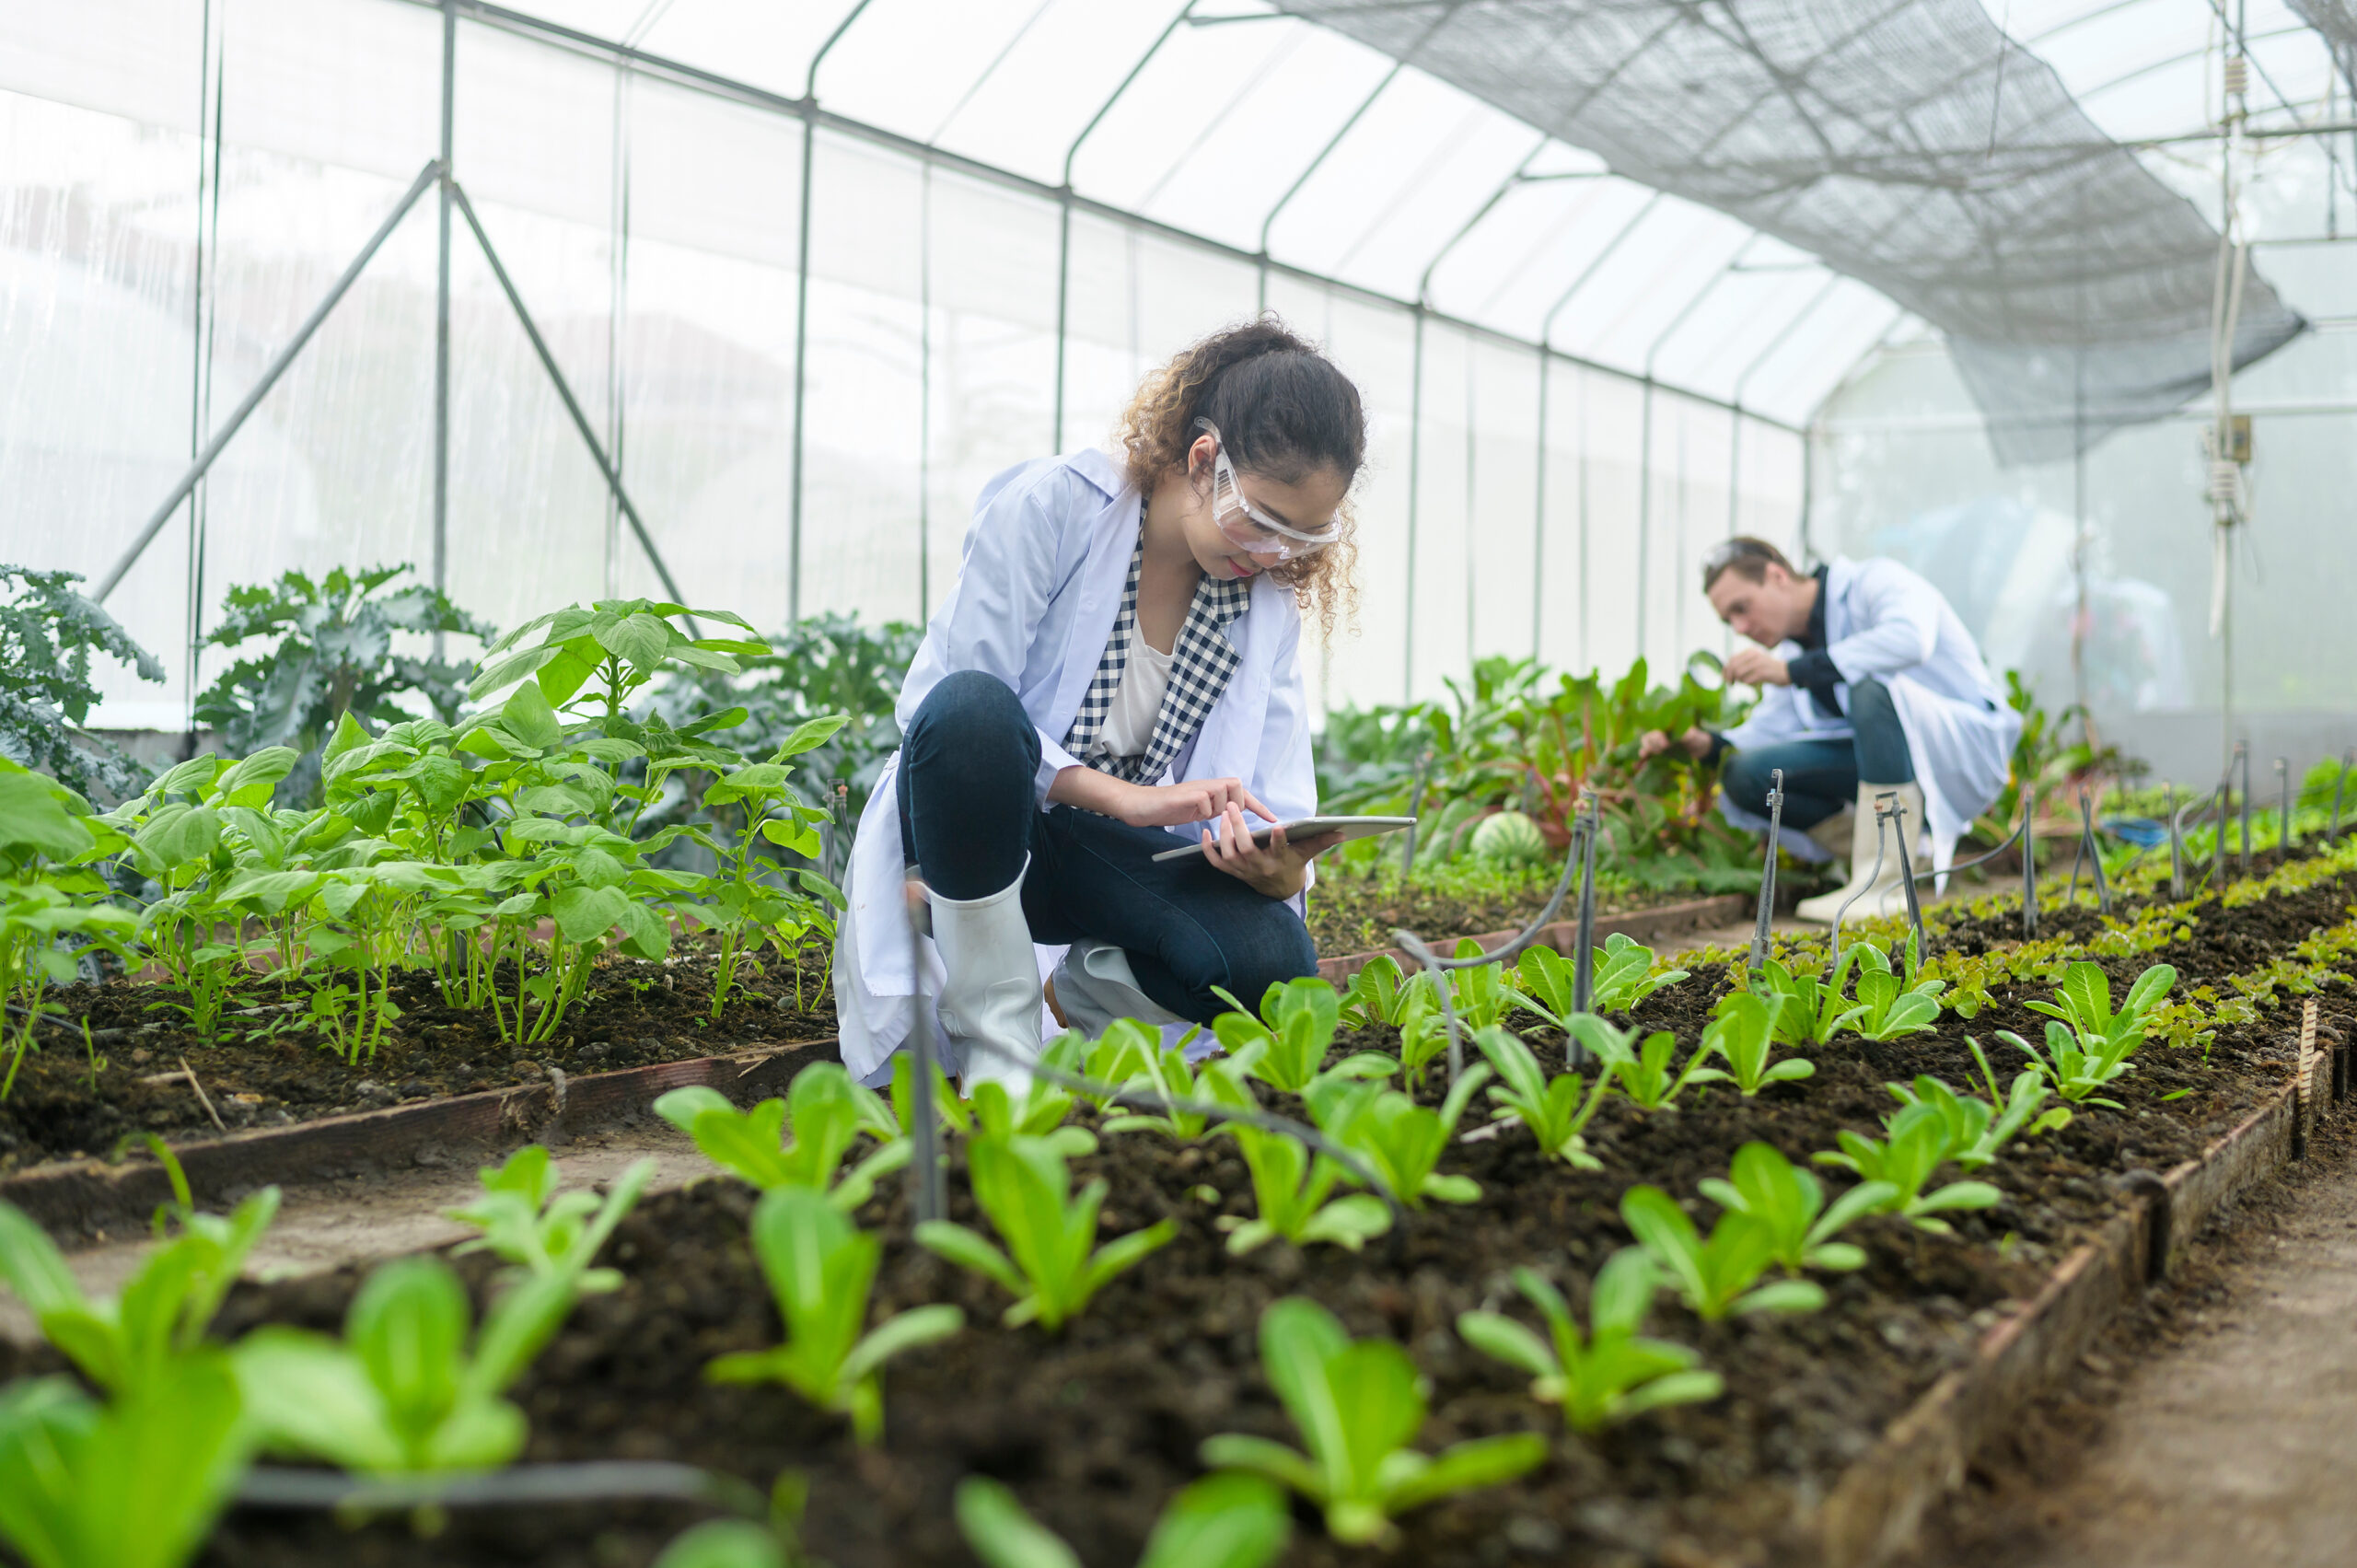 Scientis are analyzing organic vegetables plants in greenhouse , concept of agricultural technology